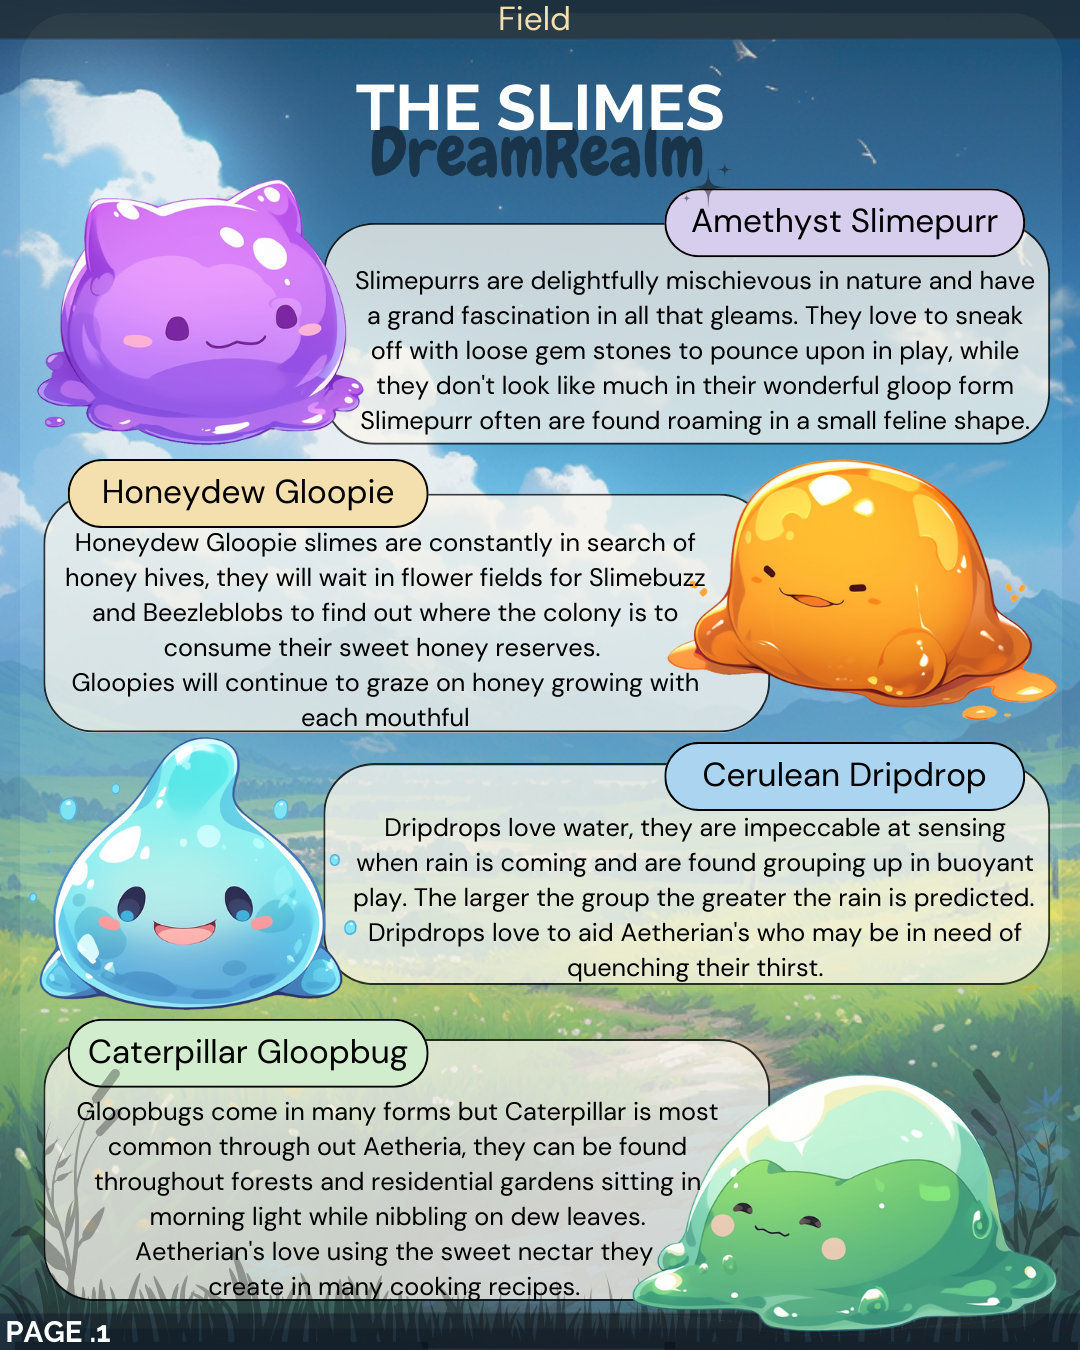 Adventure Guide] The Slimes - Page 1 by DreamRealmArt on DeviantArt